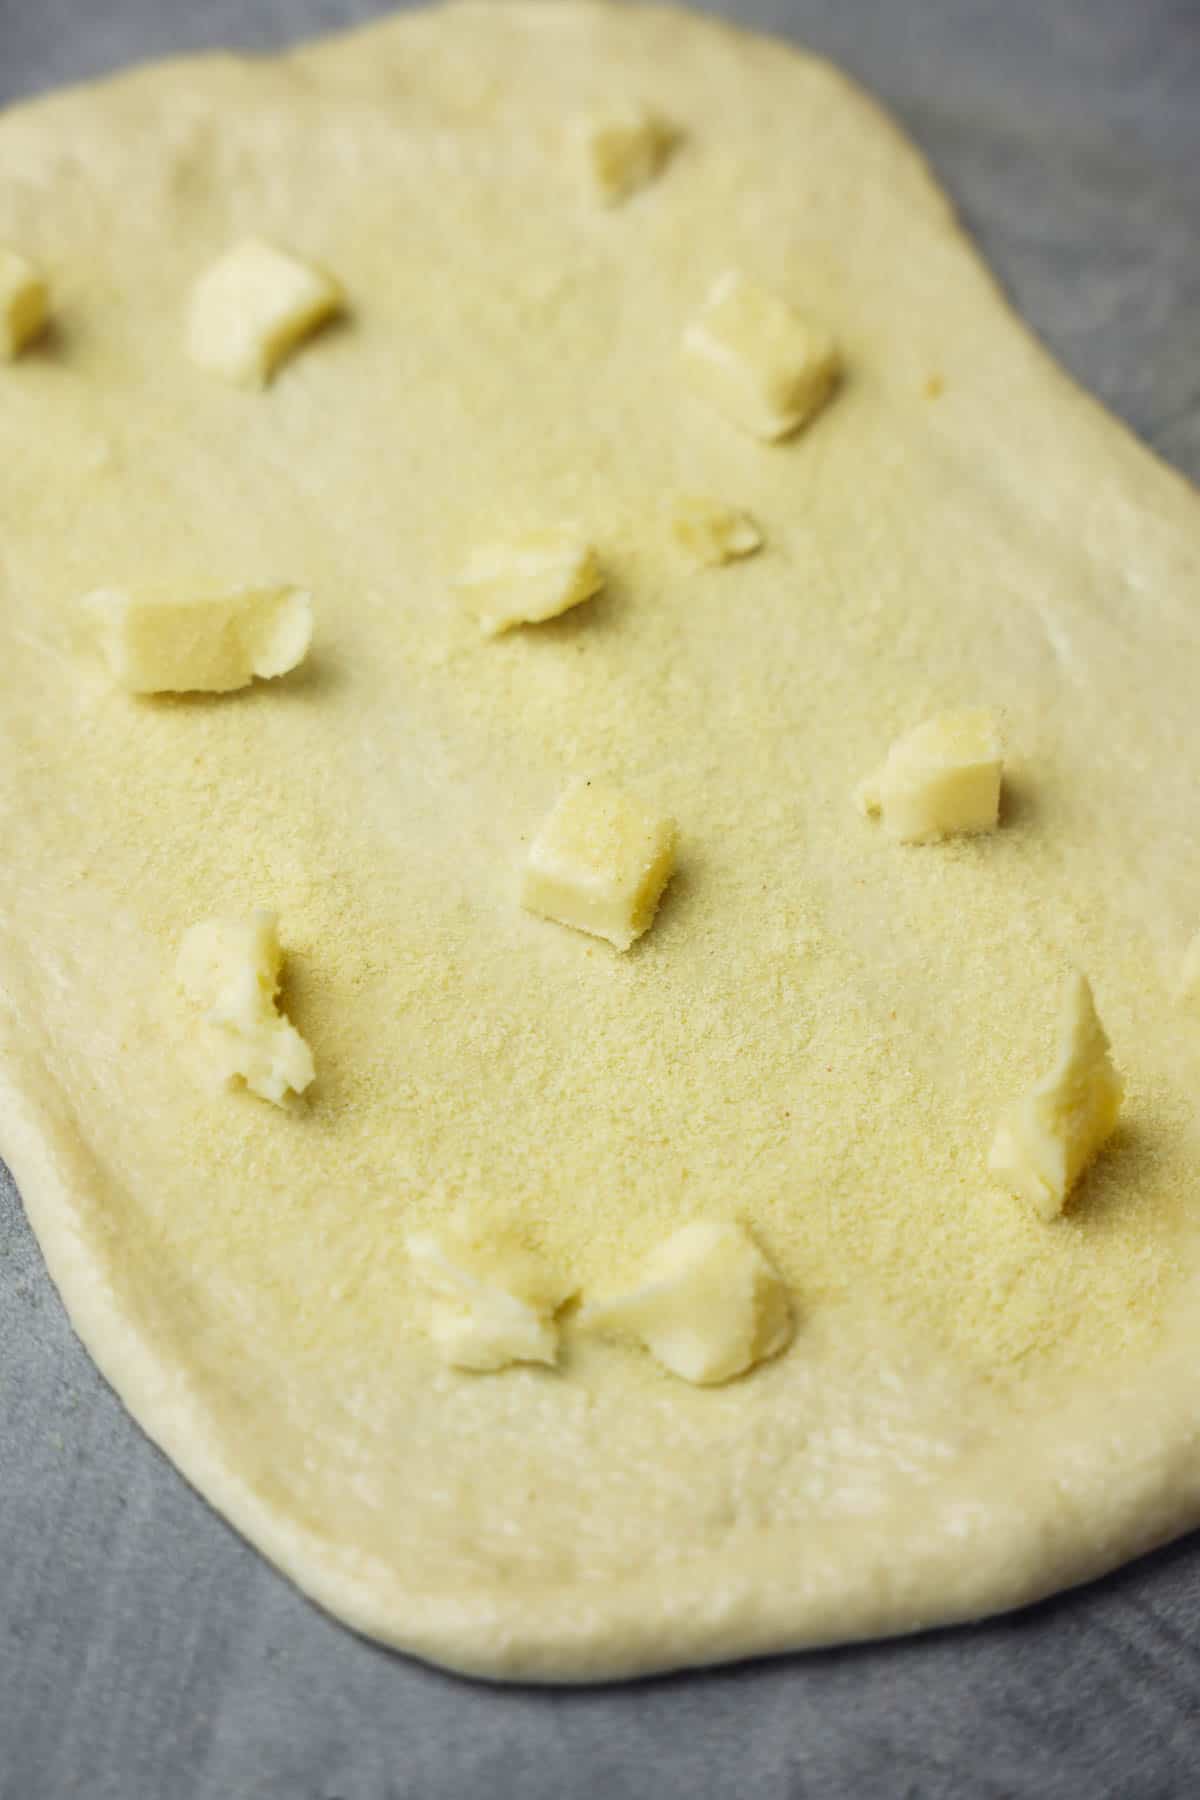 Dough rolled out and topped with butter and semolina for the first folding.